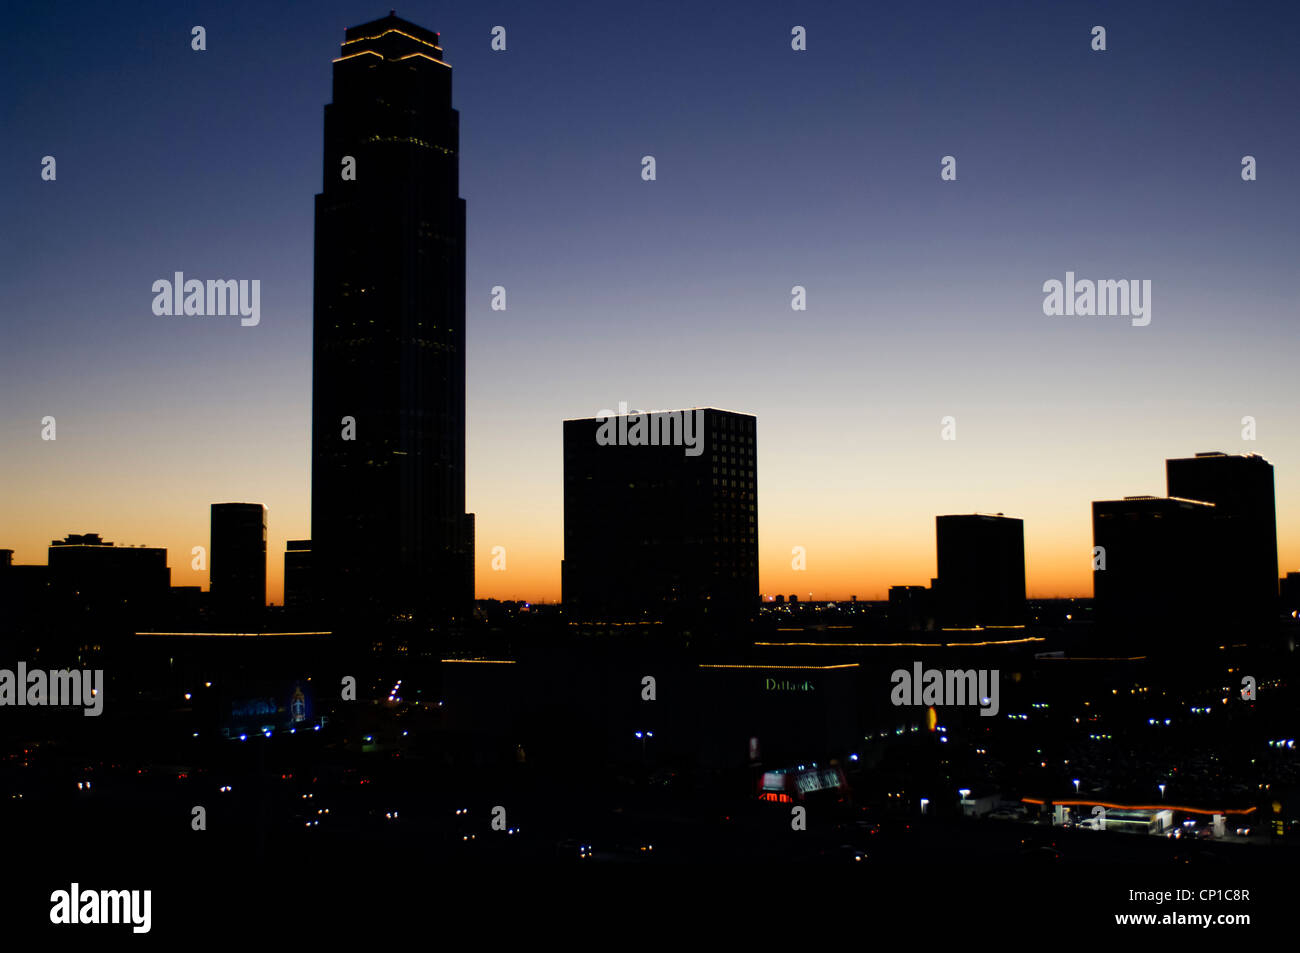 View of the Galleria Mall area of Houston at sunset. Stock Photo